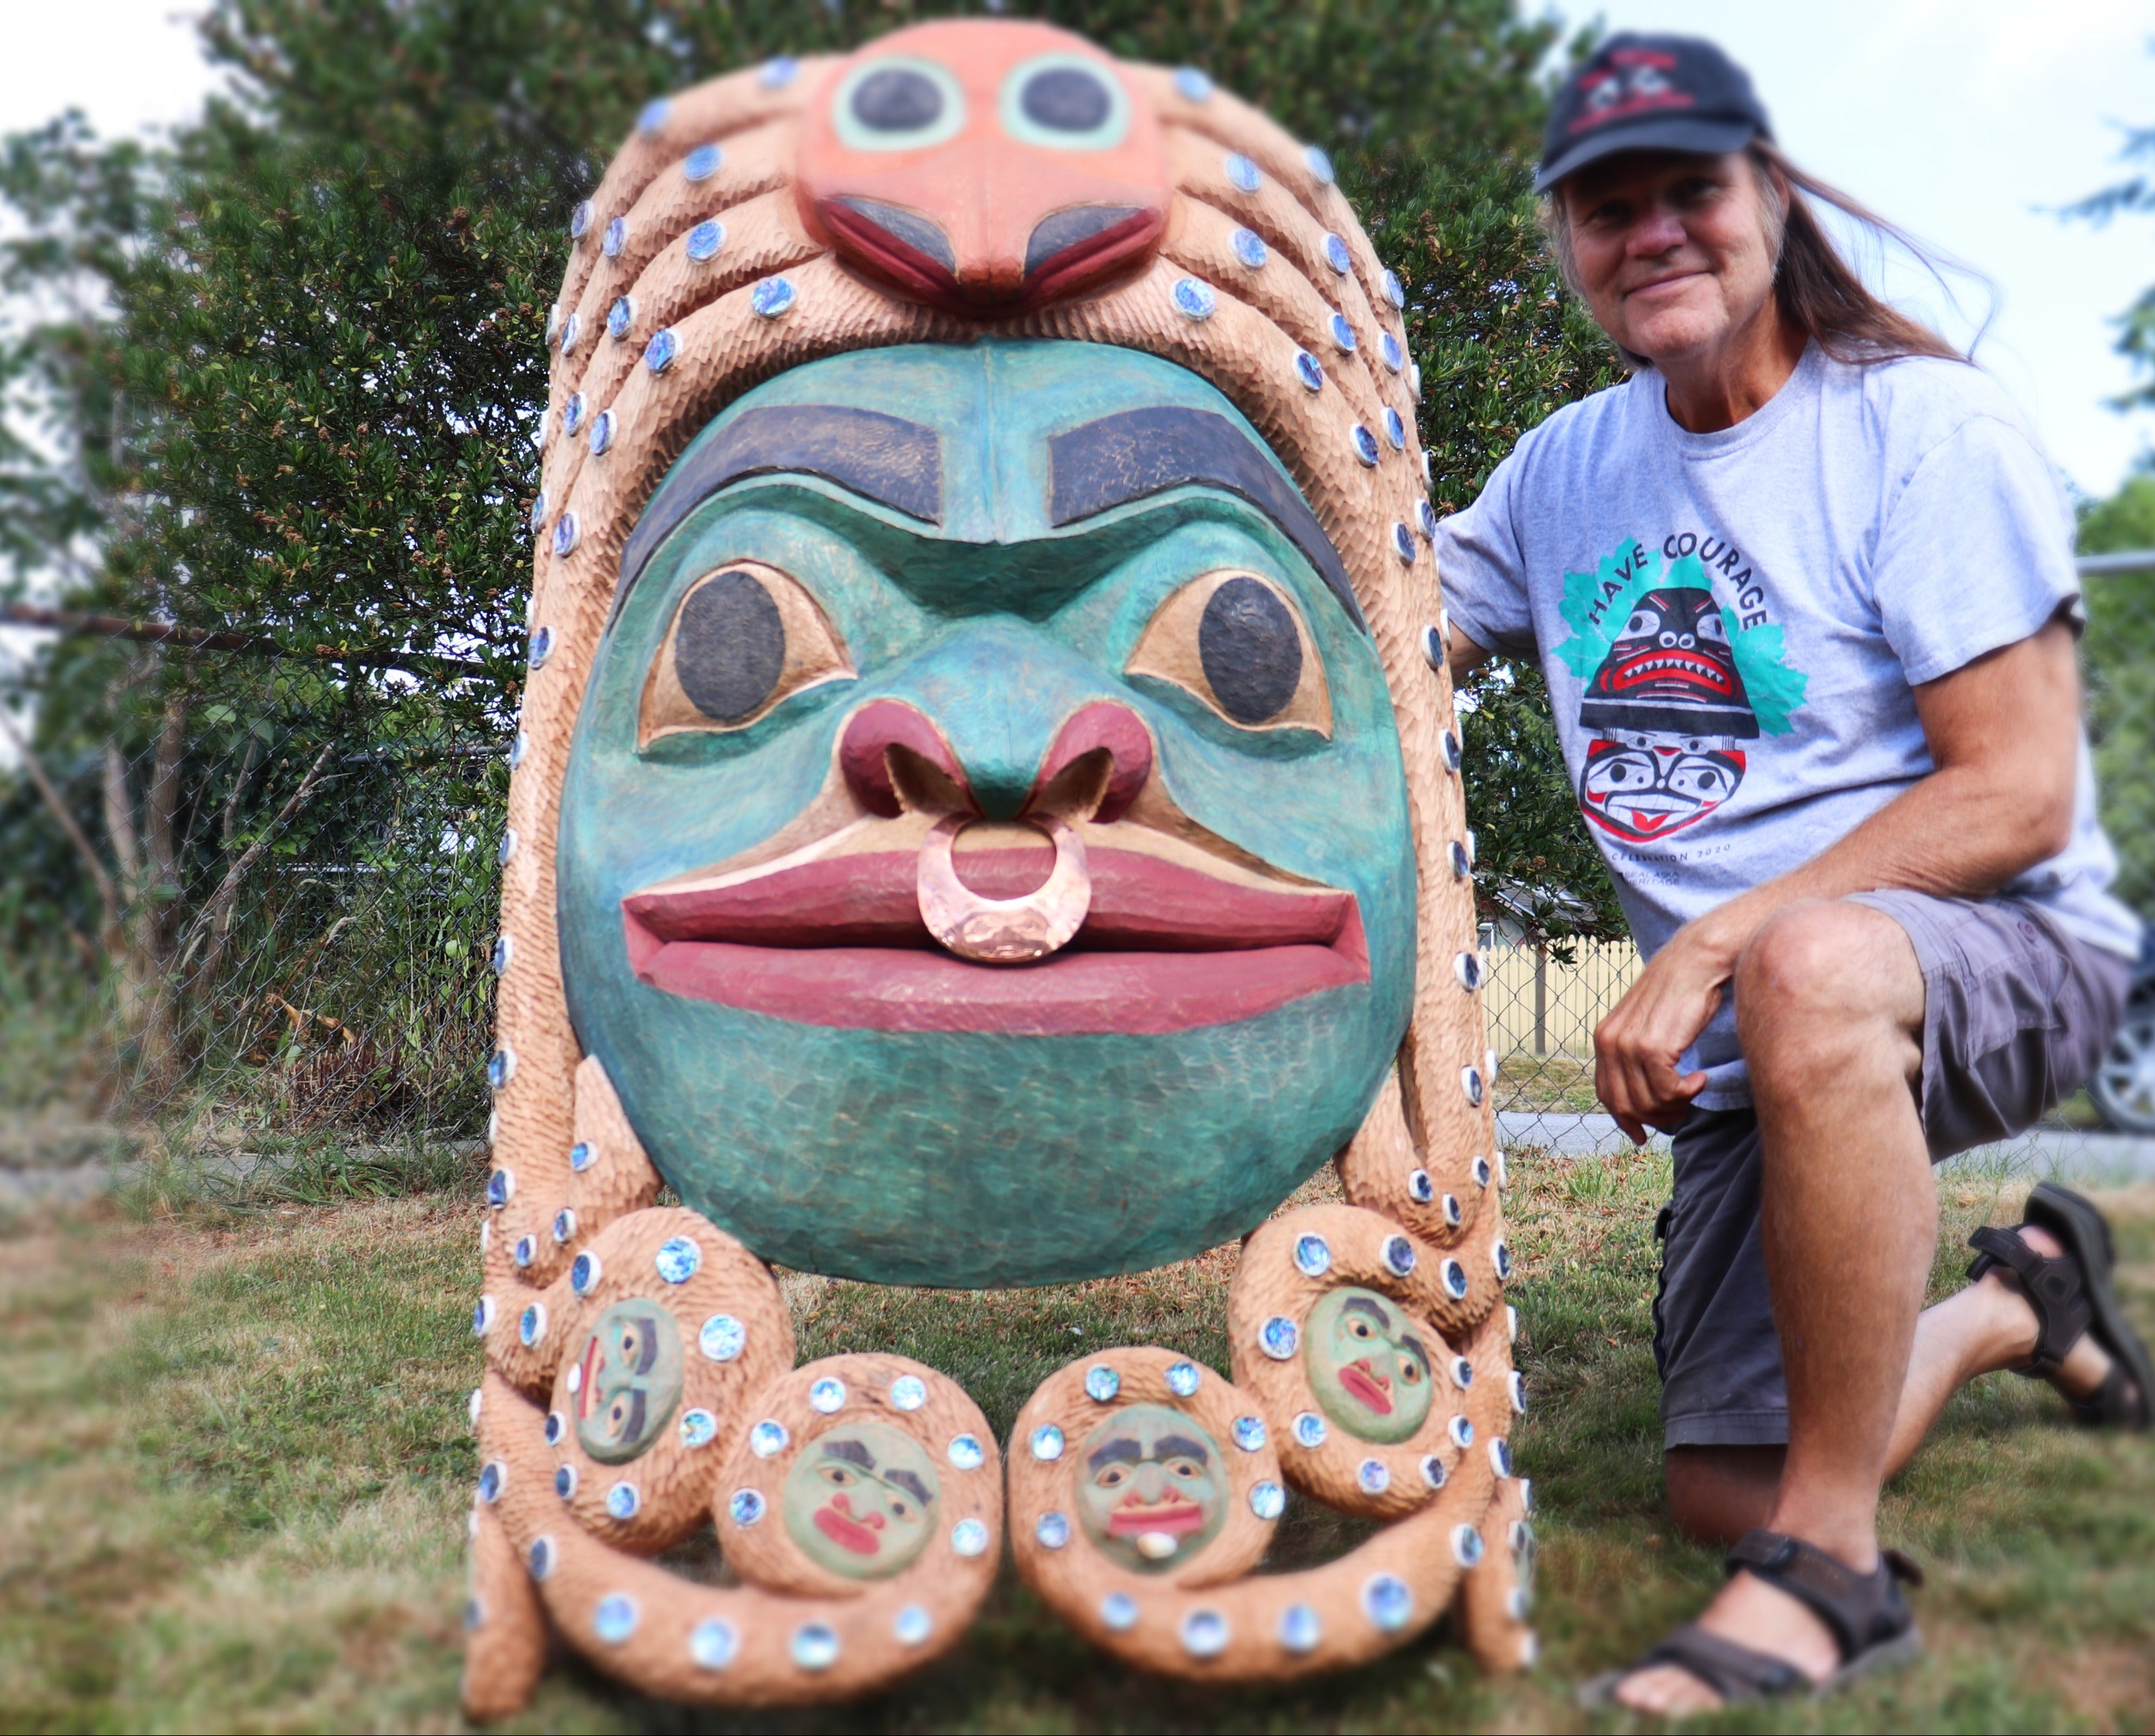 Fred Fulmer Tlingit Artist kneeling next to the finished product of the Chookaneidee Devilfish carved cedar giant mask